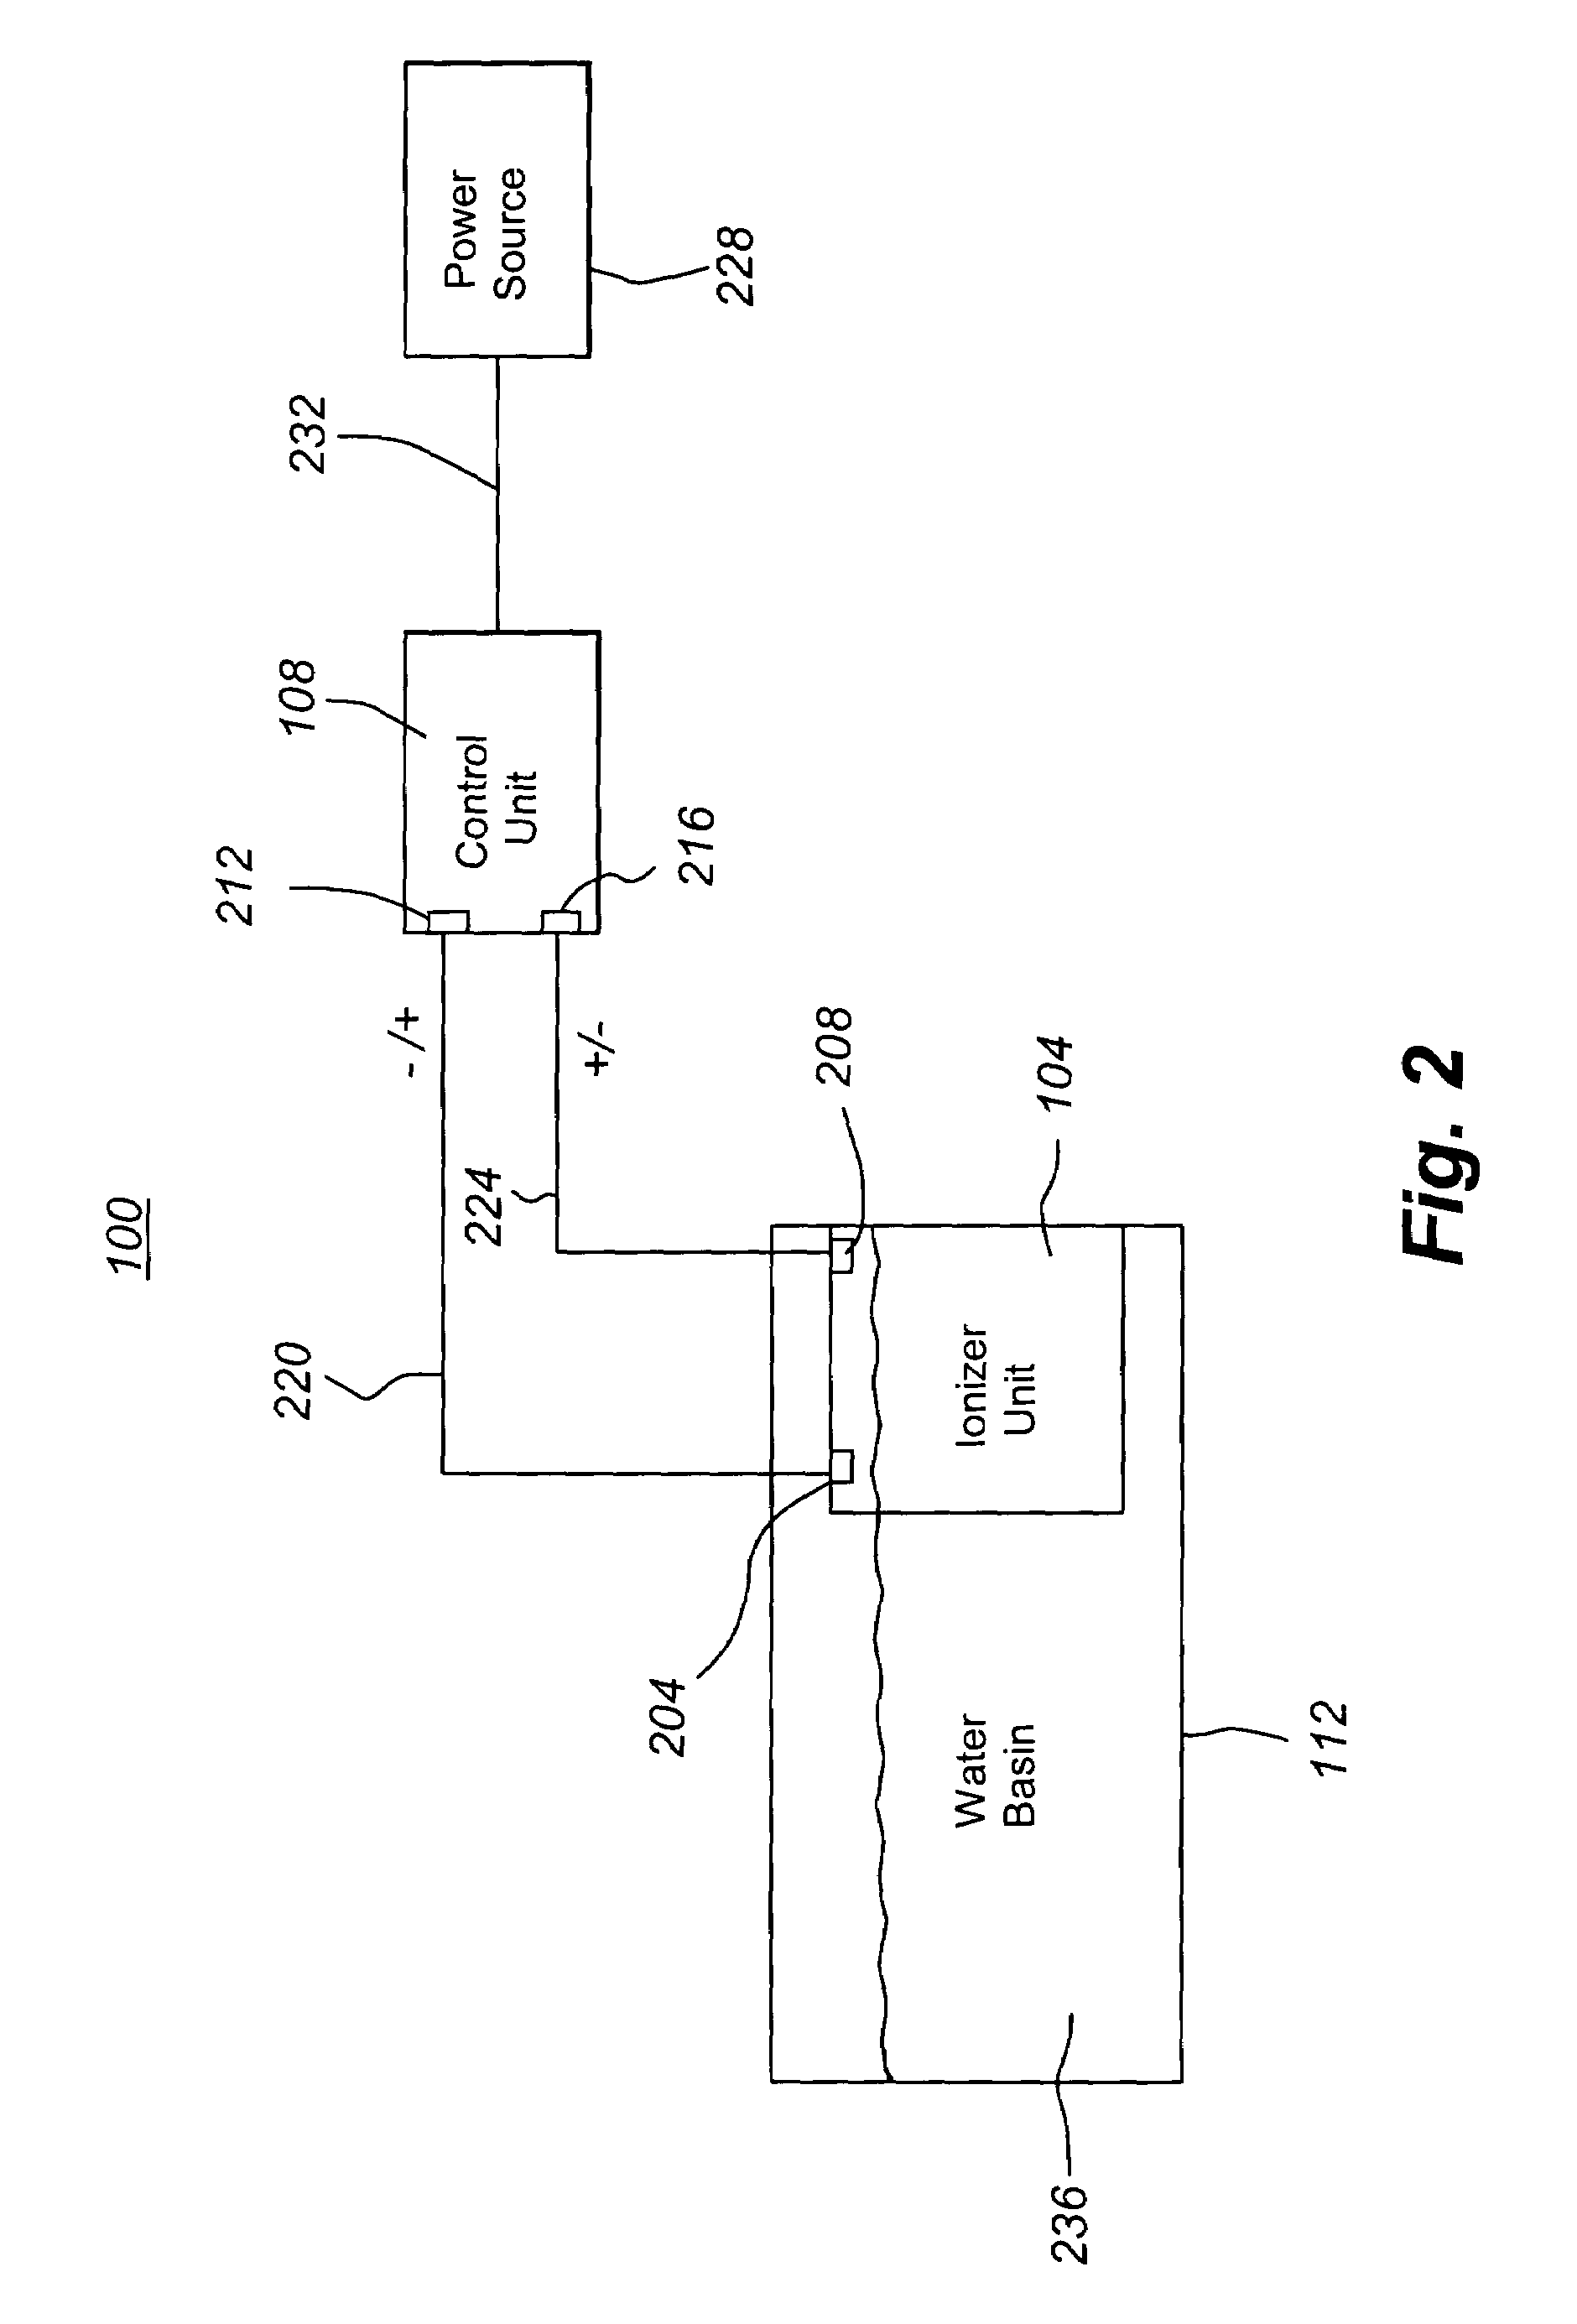 Therapeutic electrolysis device